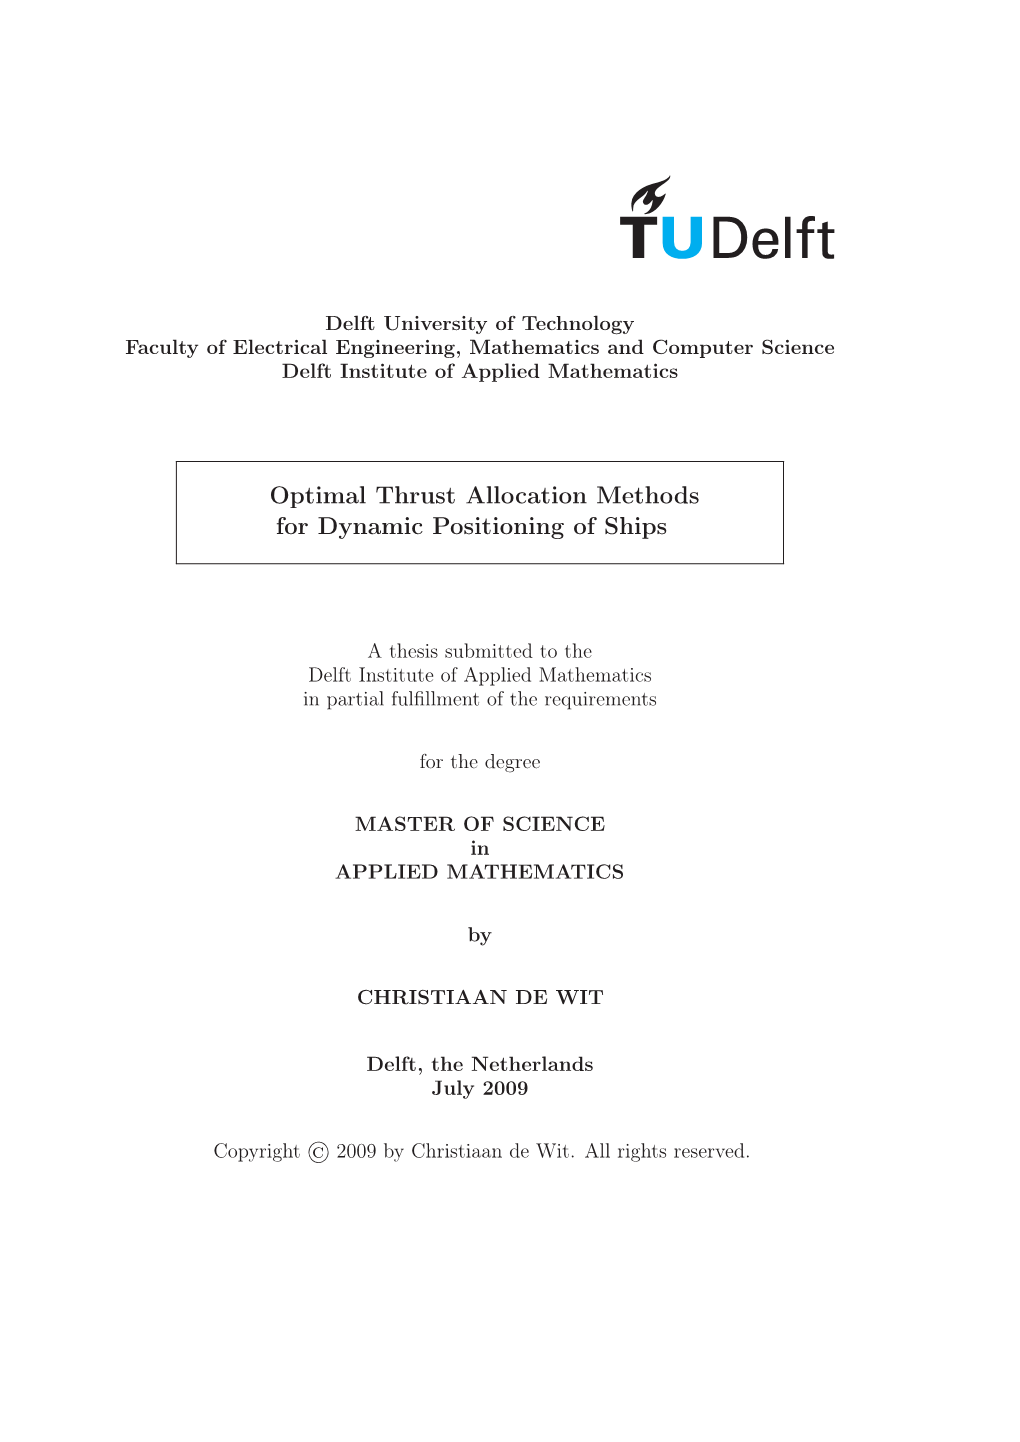 Optimal Thrust Allocation Methods for Dynamic Positioning of Ships